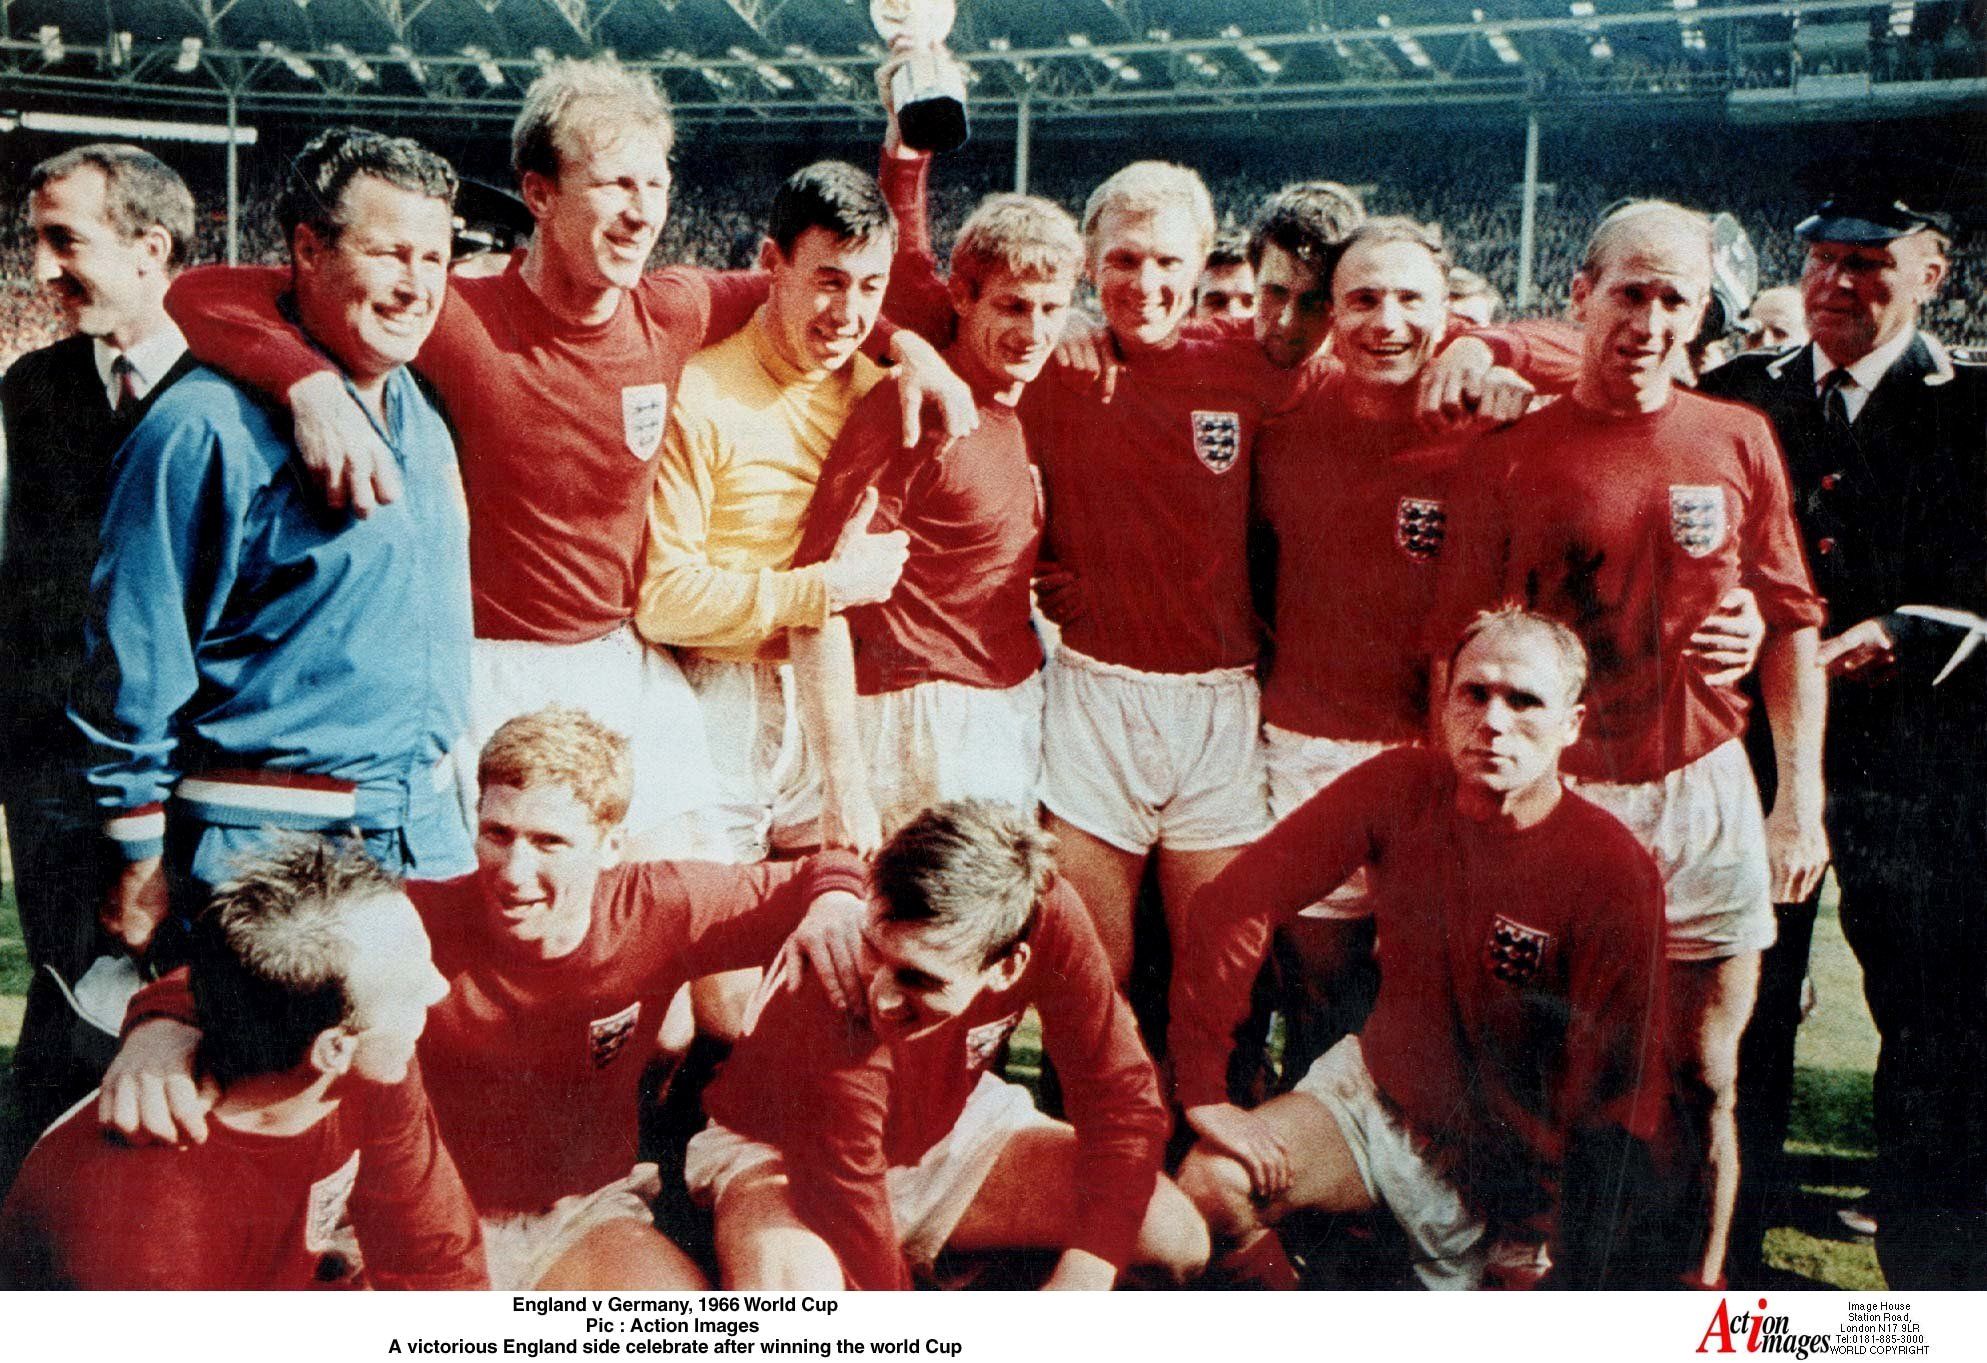 England won the 1966 World Cup